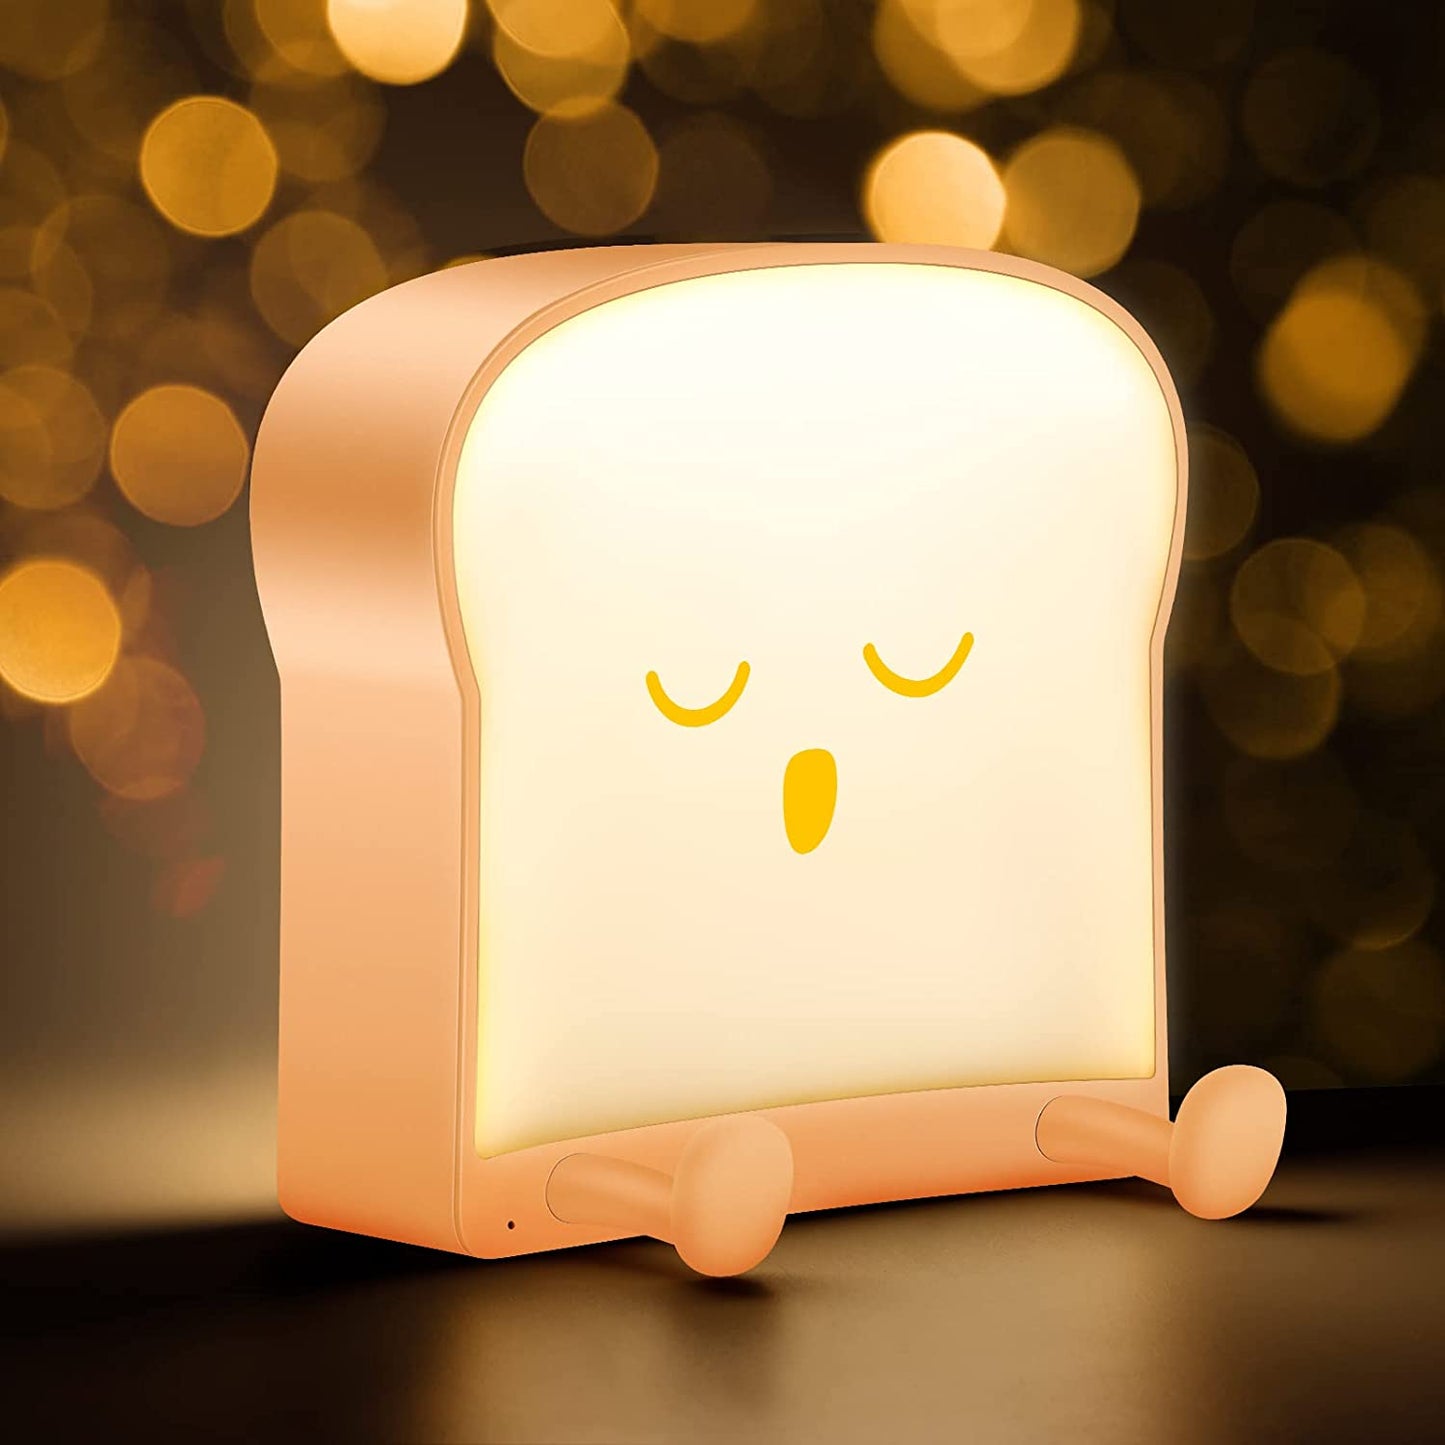 Night light - LED toast night light with silicone feet USB rechargeable and timer